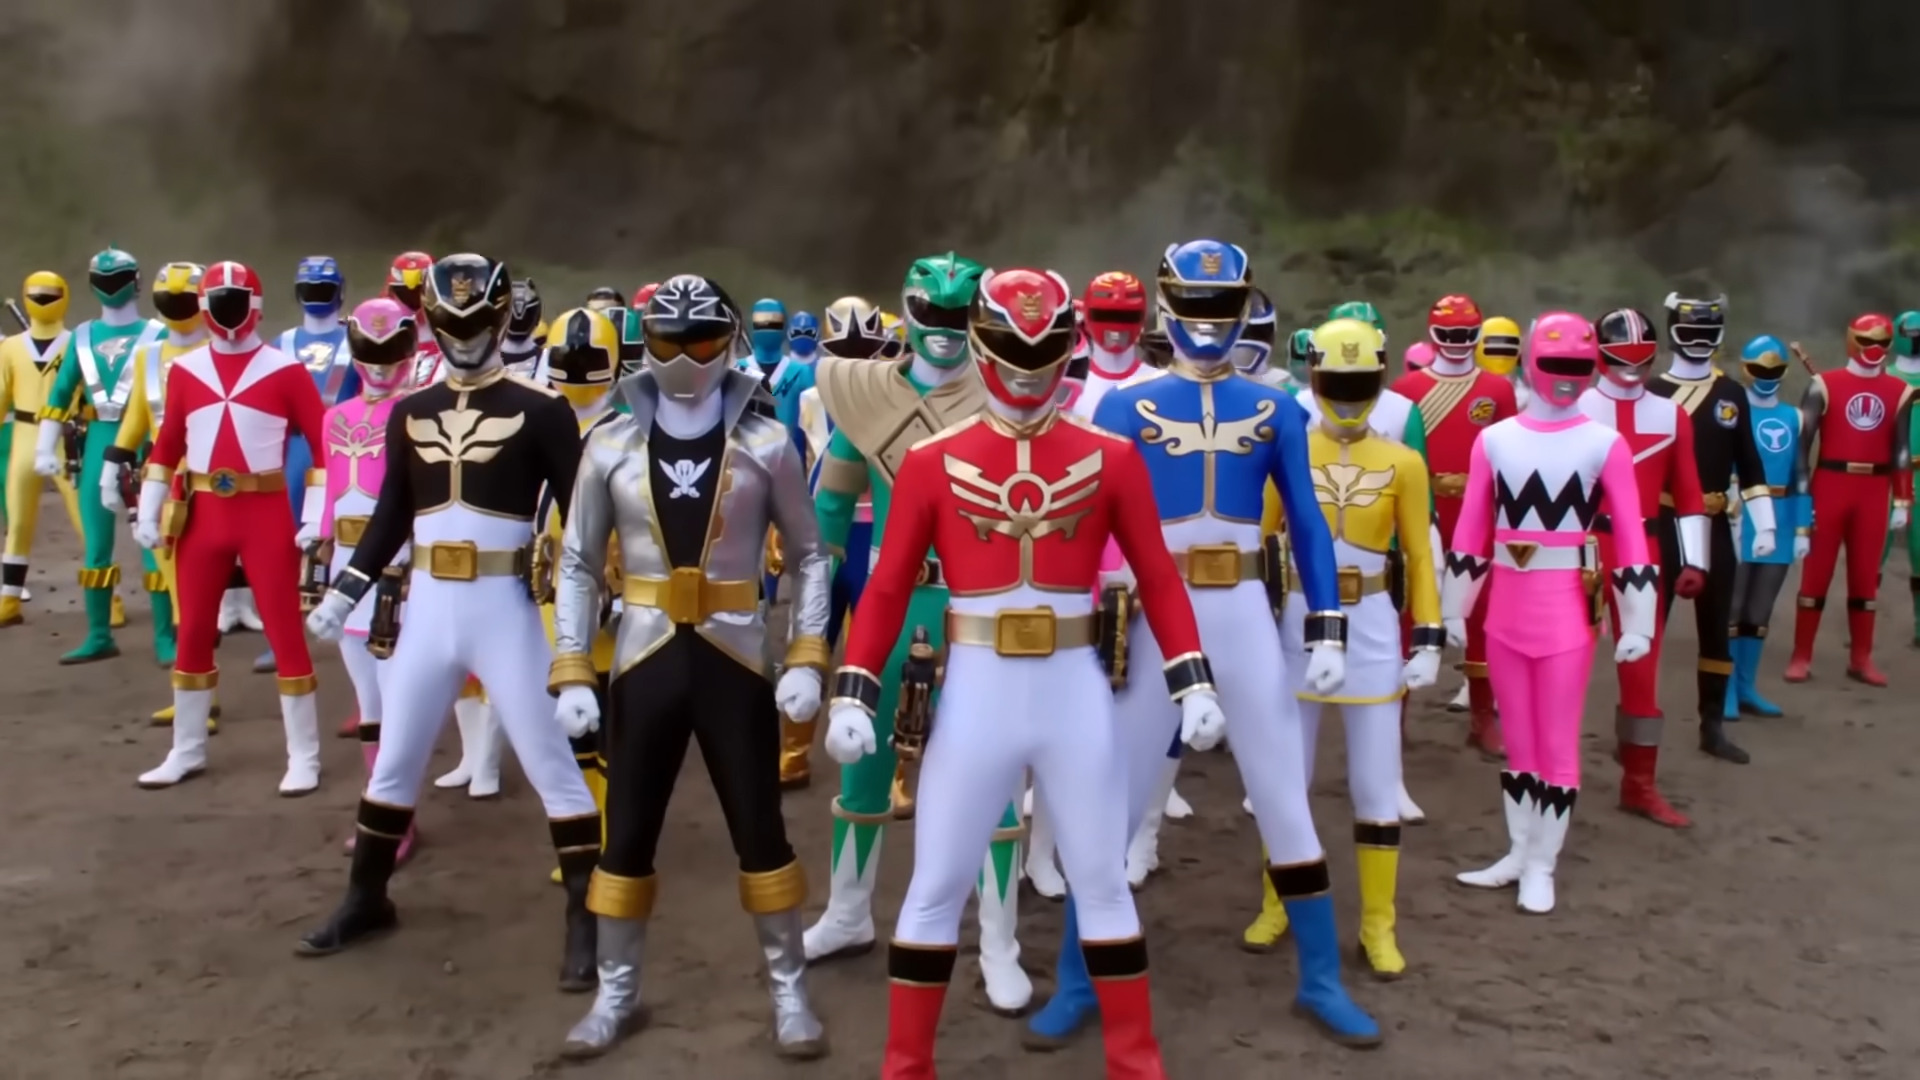 The full might of the Morphin' Grid is laid bare in Power Rangers Super Megaforce Season 1 Episode 20 "Legendary Battle" (2014), Saban Entertainment